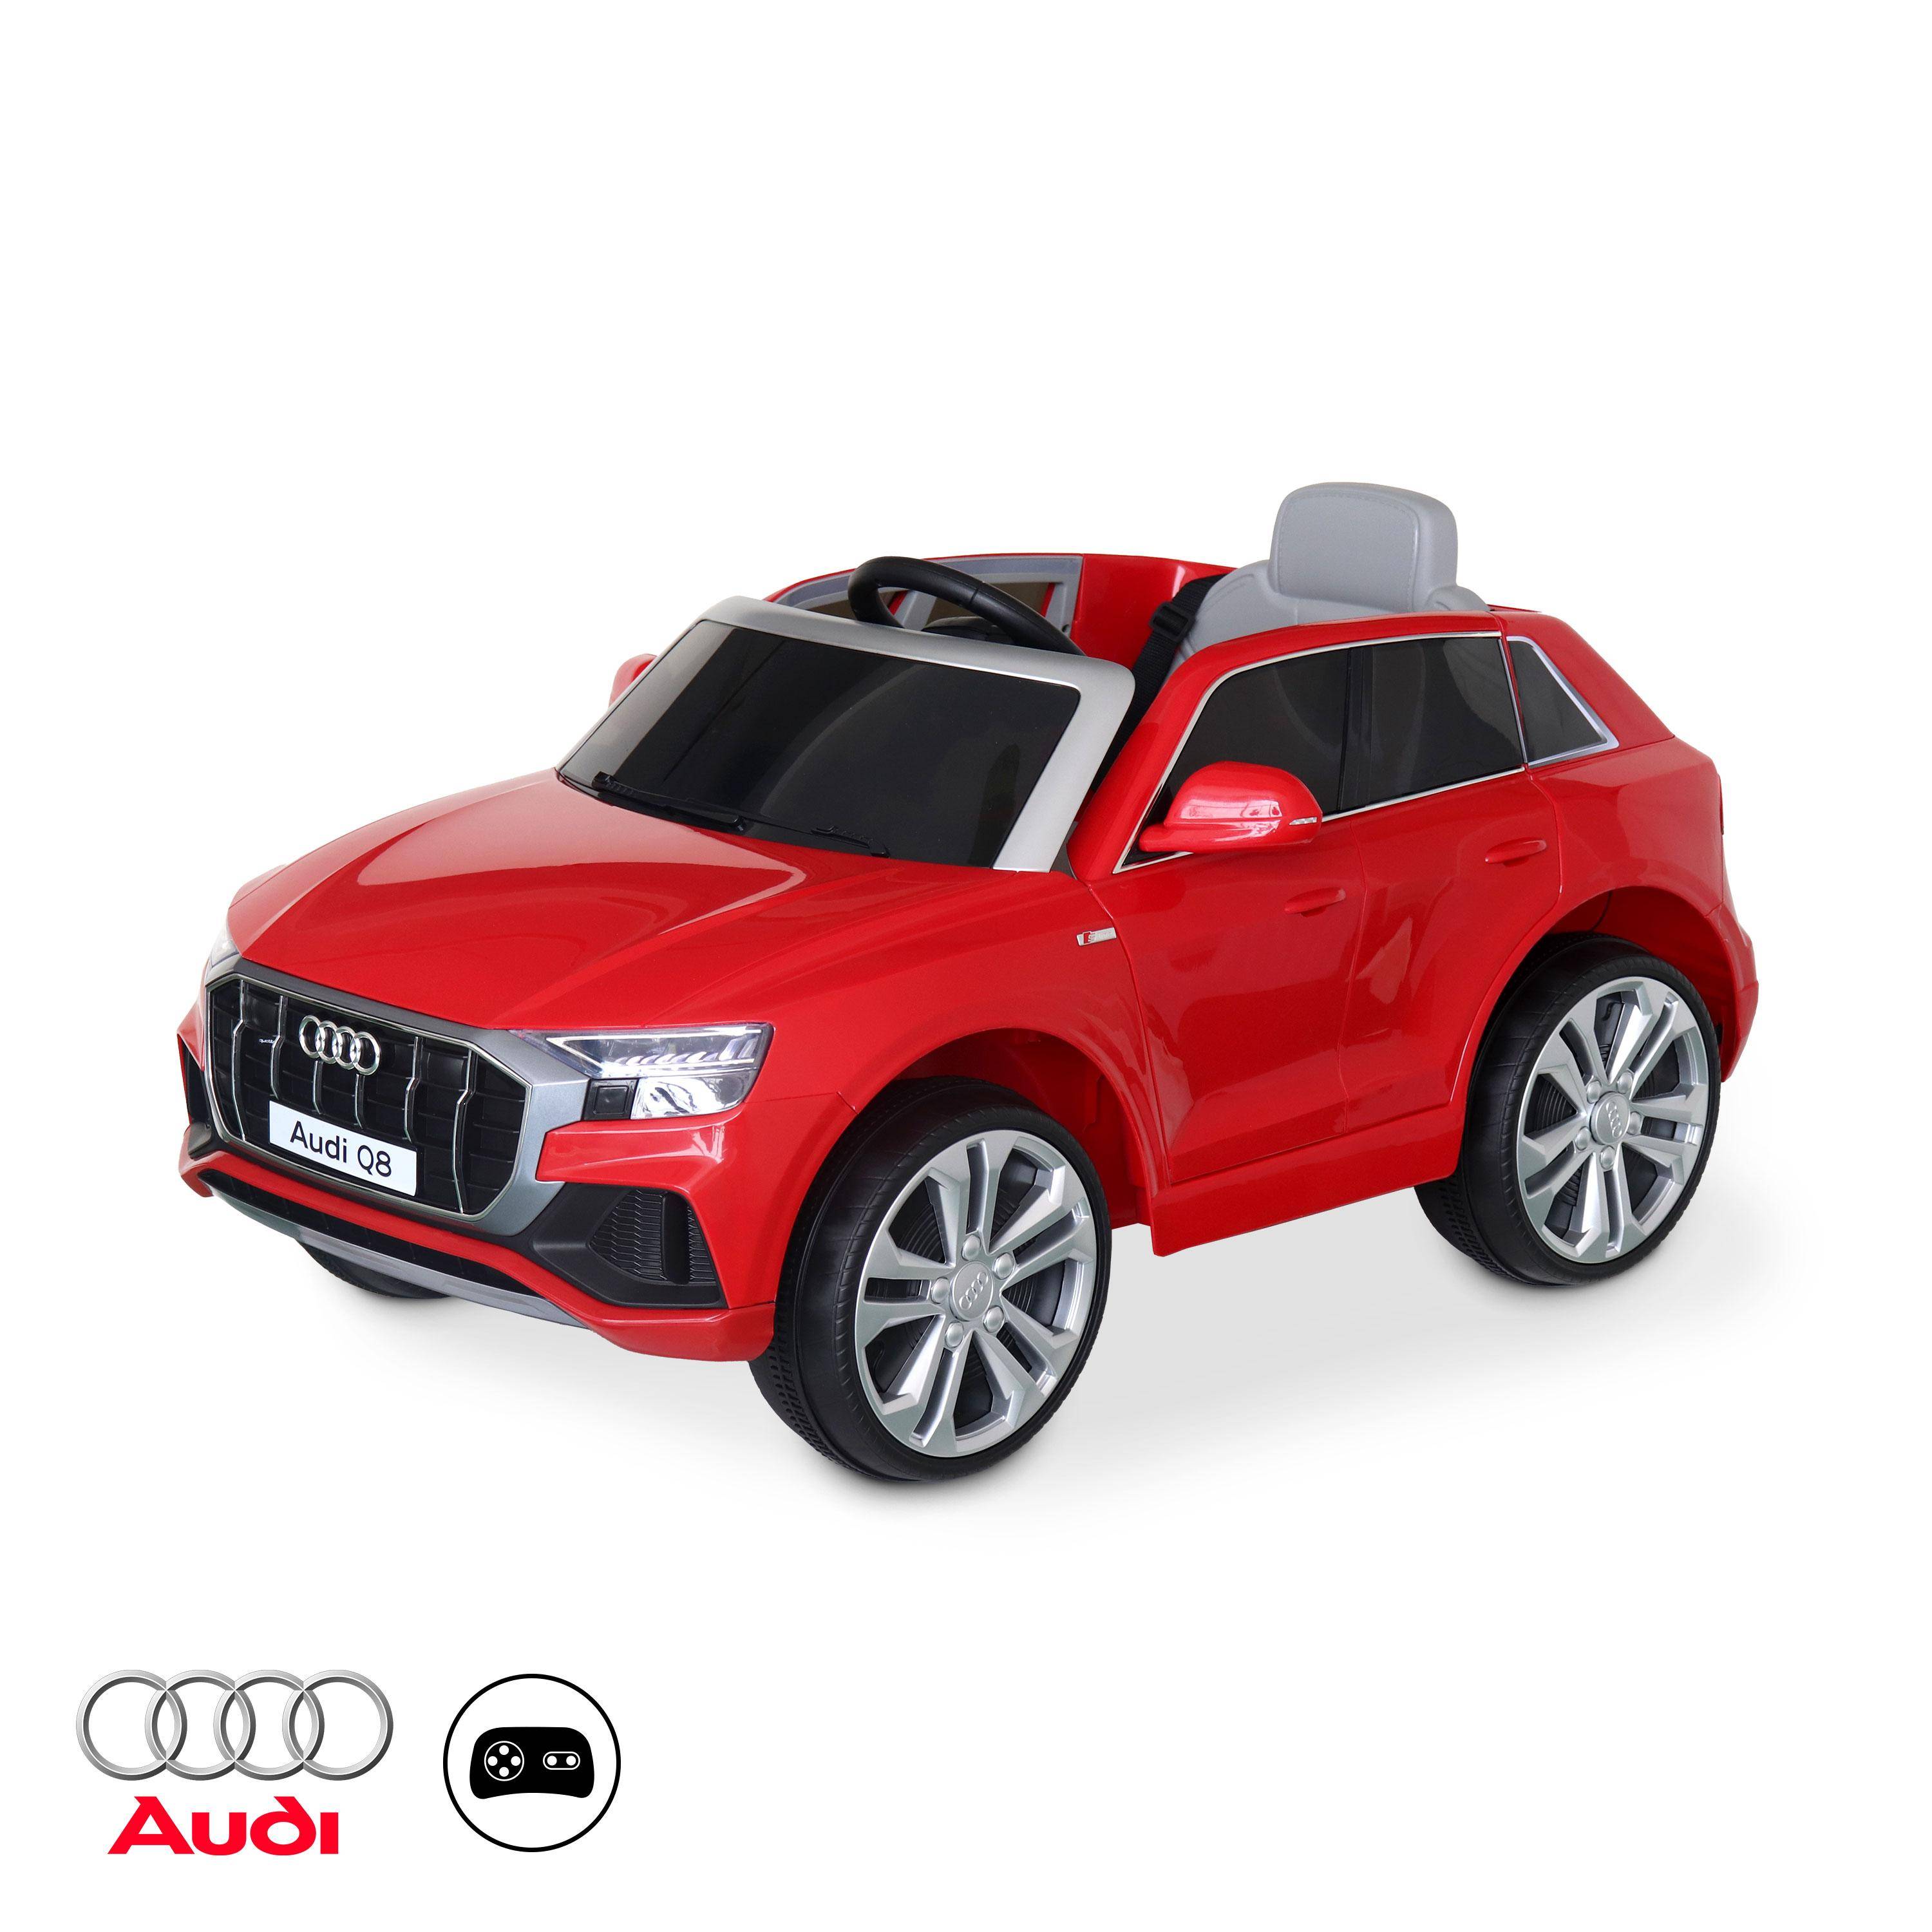 Children's electric car 12V, 1 seat with car radio and remote control - AUDI Q8 - Red,sweeek,Photo1